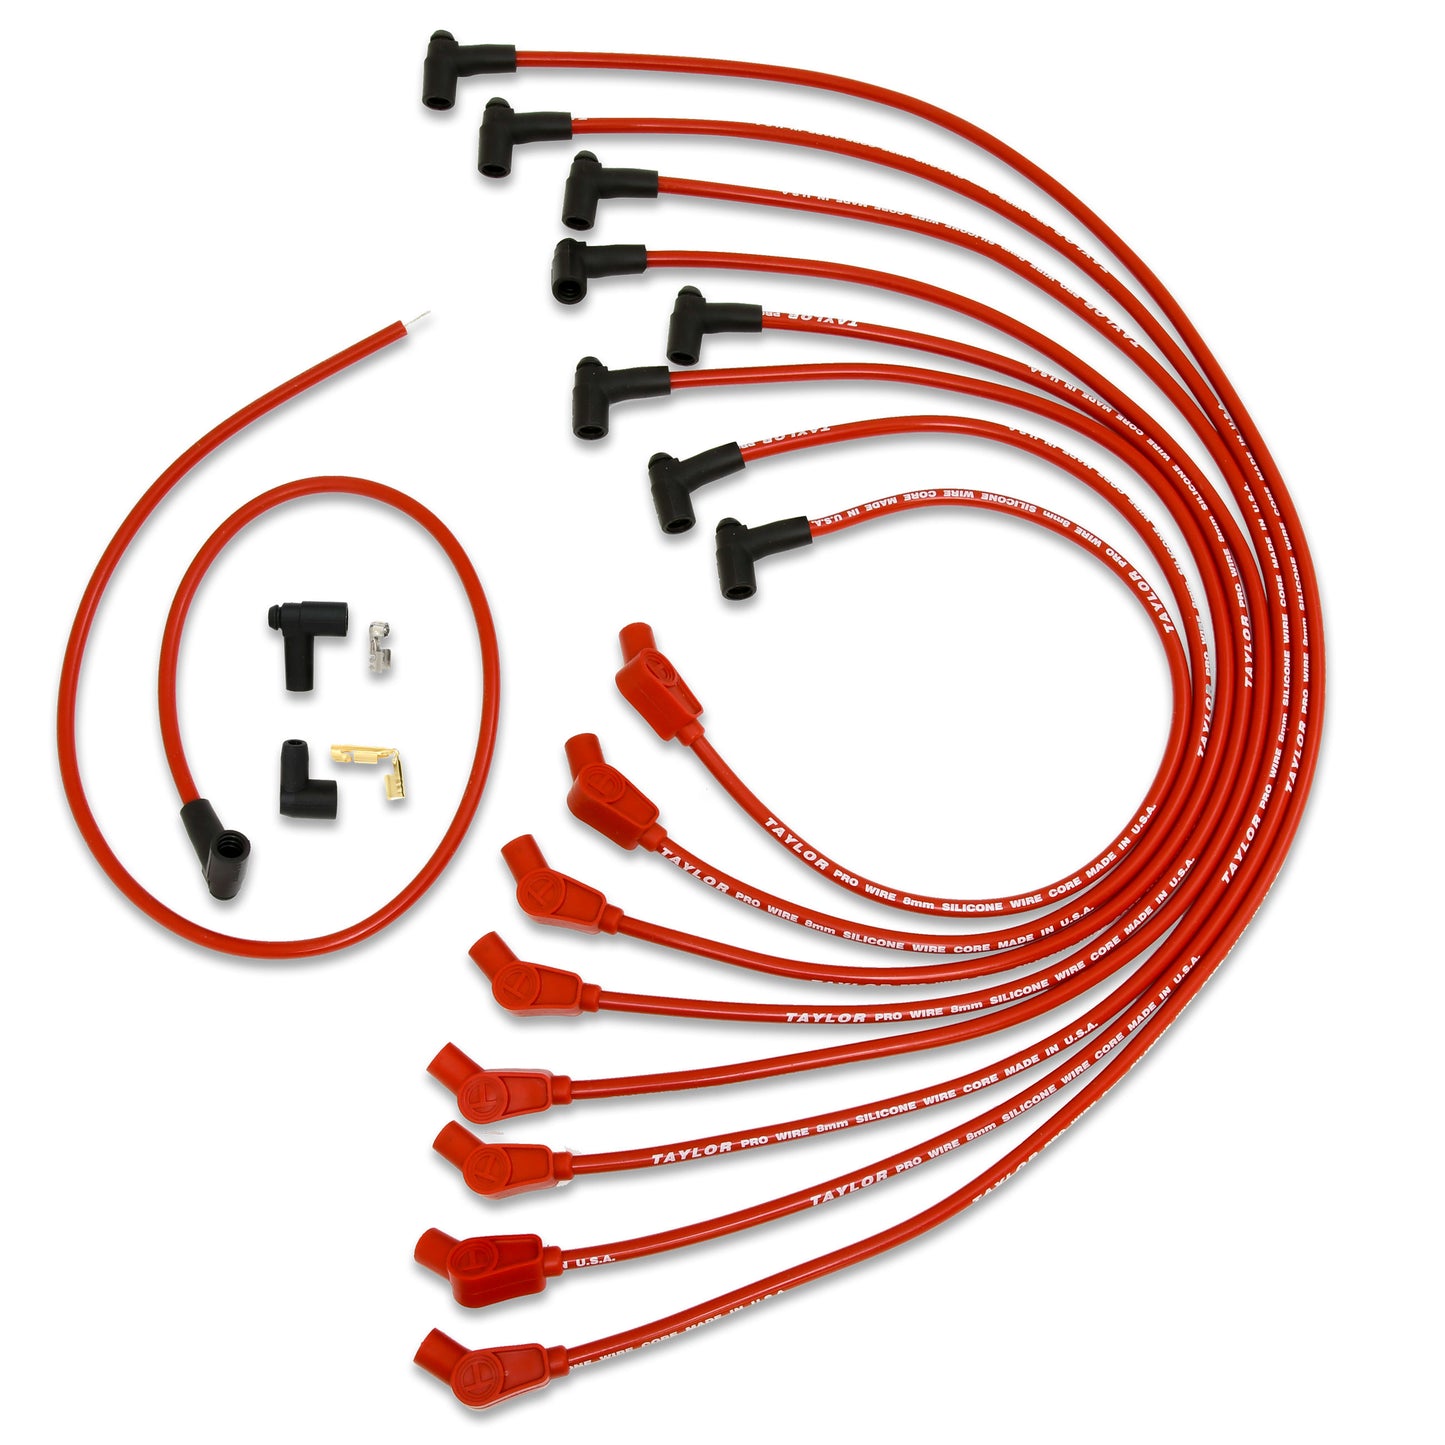 Taylor Cable 79232 10.4mm 409 Spiro Pro Race Fit Spark Plug Wires 135° Red